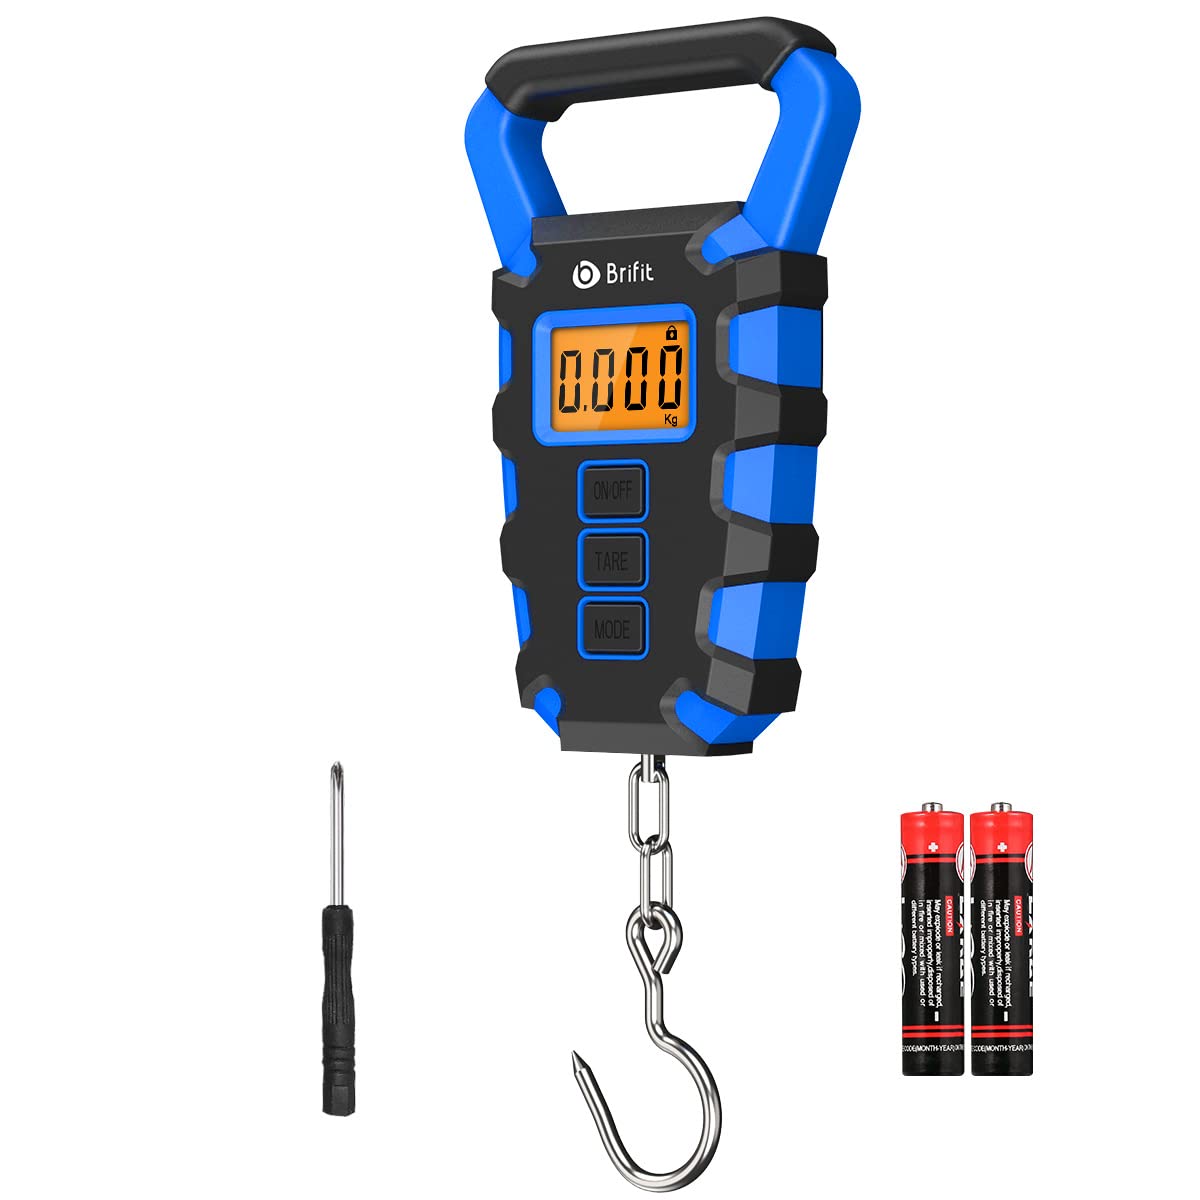 50kg/10g Portable Digital Luggage Scale - Perfect for Travel & Outdoor  Weighing! (Batteries Are Not Included)